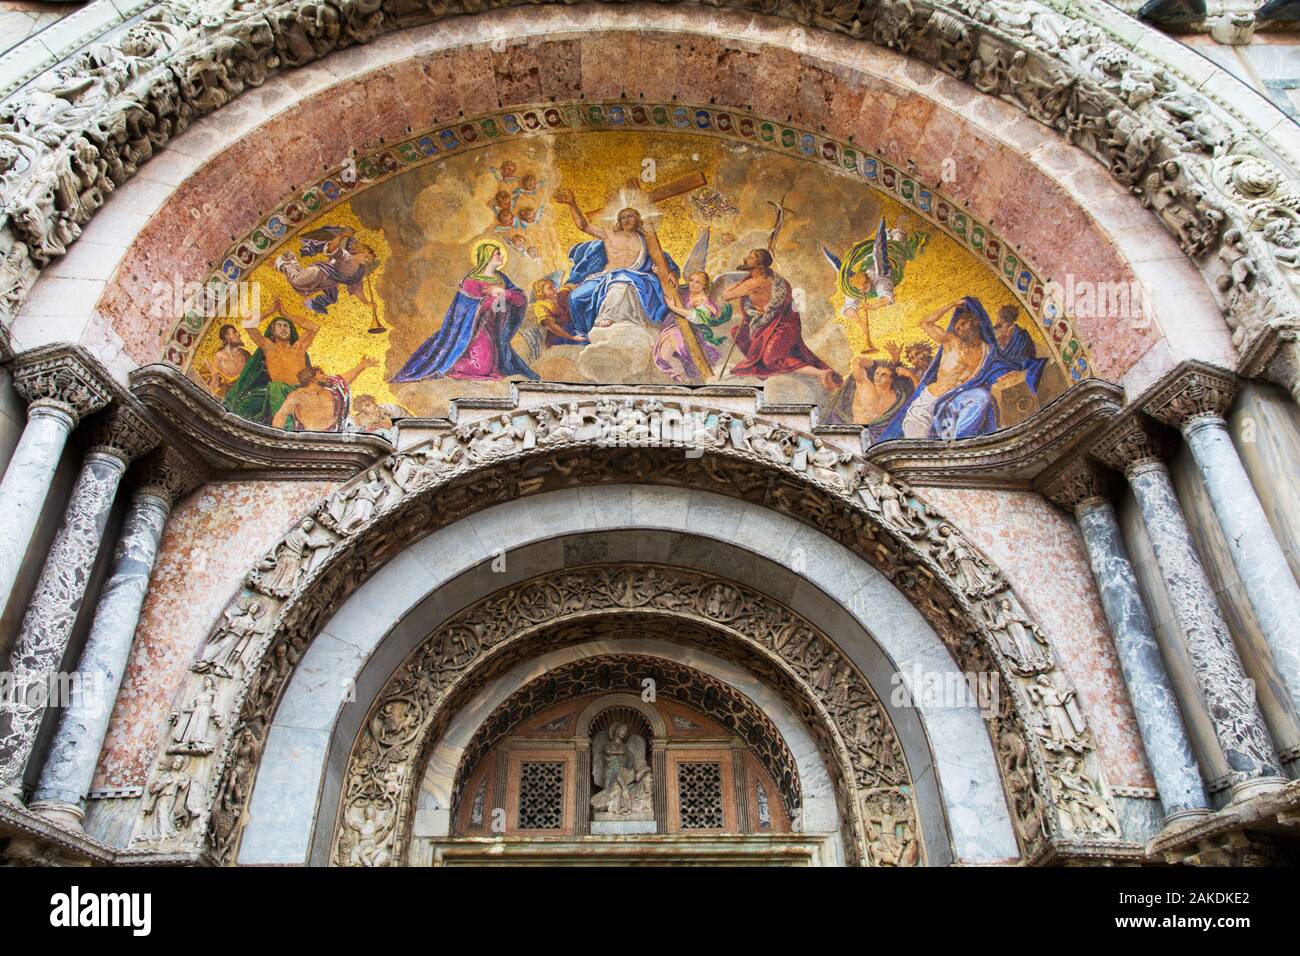 The facade of St Marks Basilica featuring The Last Judgement in Venice Italy Stock Photo